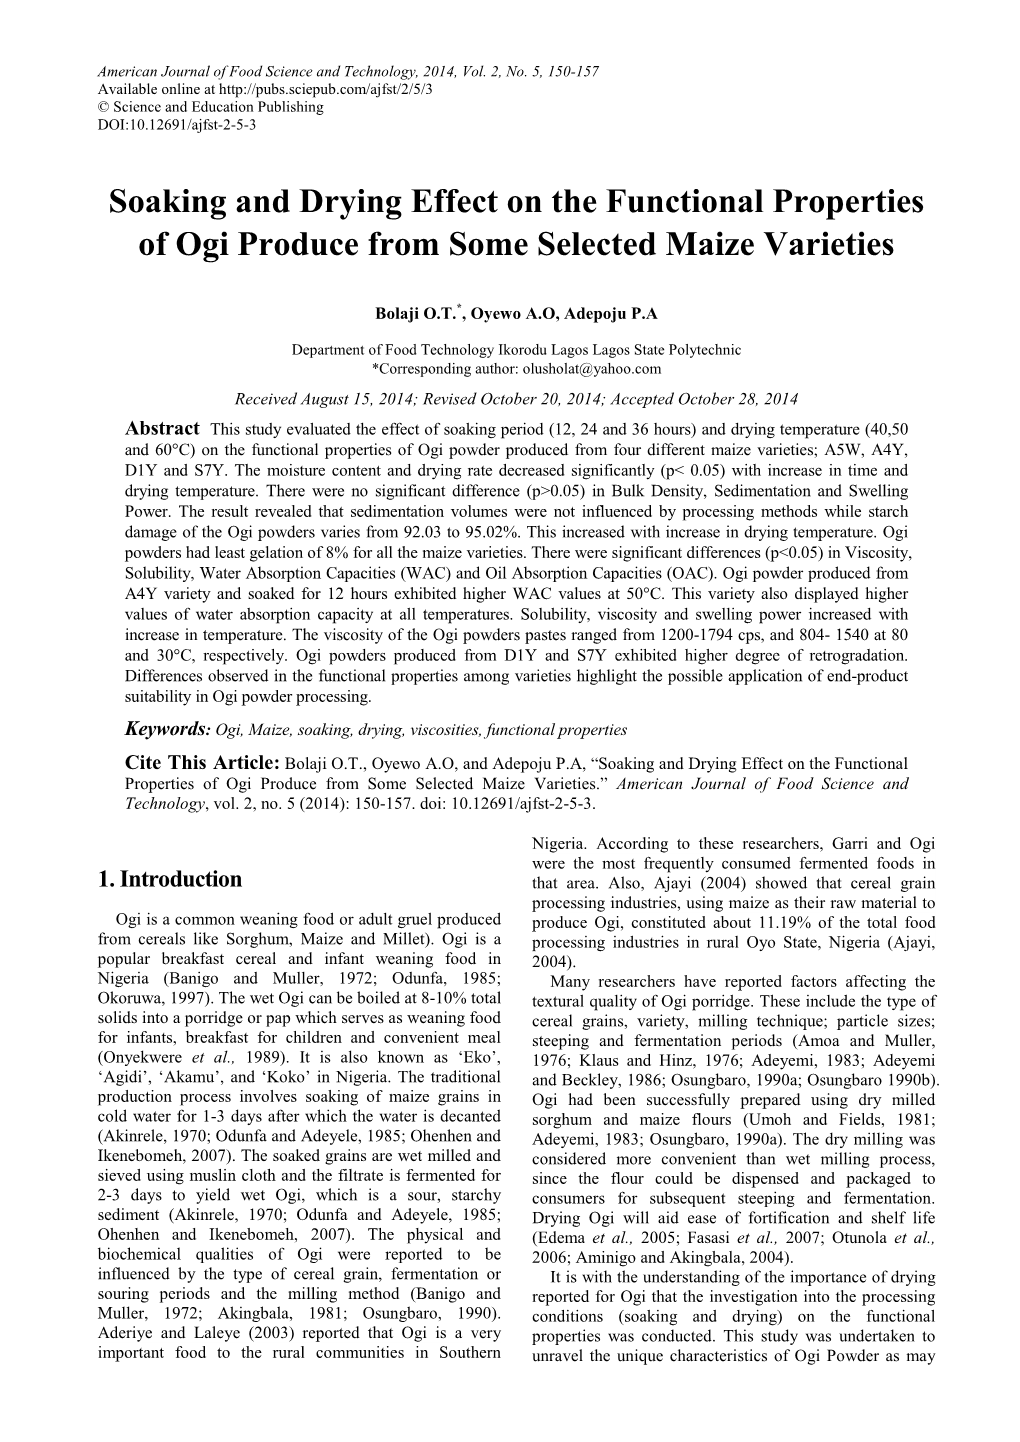 Soaking and Drying Effect on the Functional Properties of Ogi Produce from Some Selected Maize Varieties